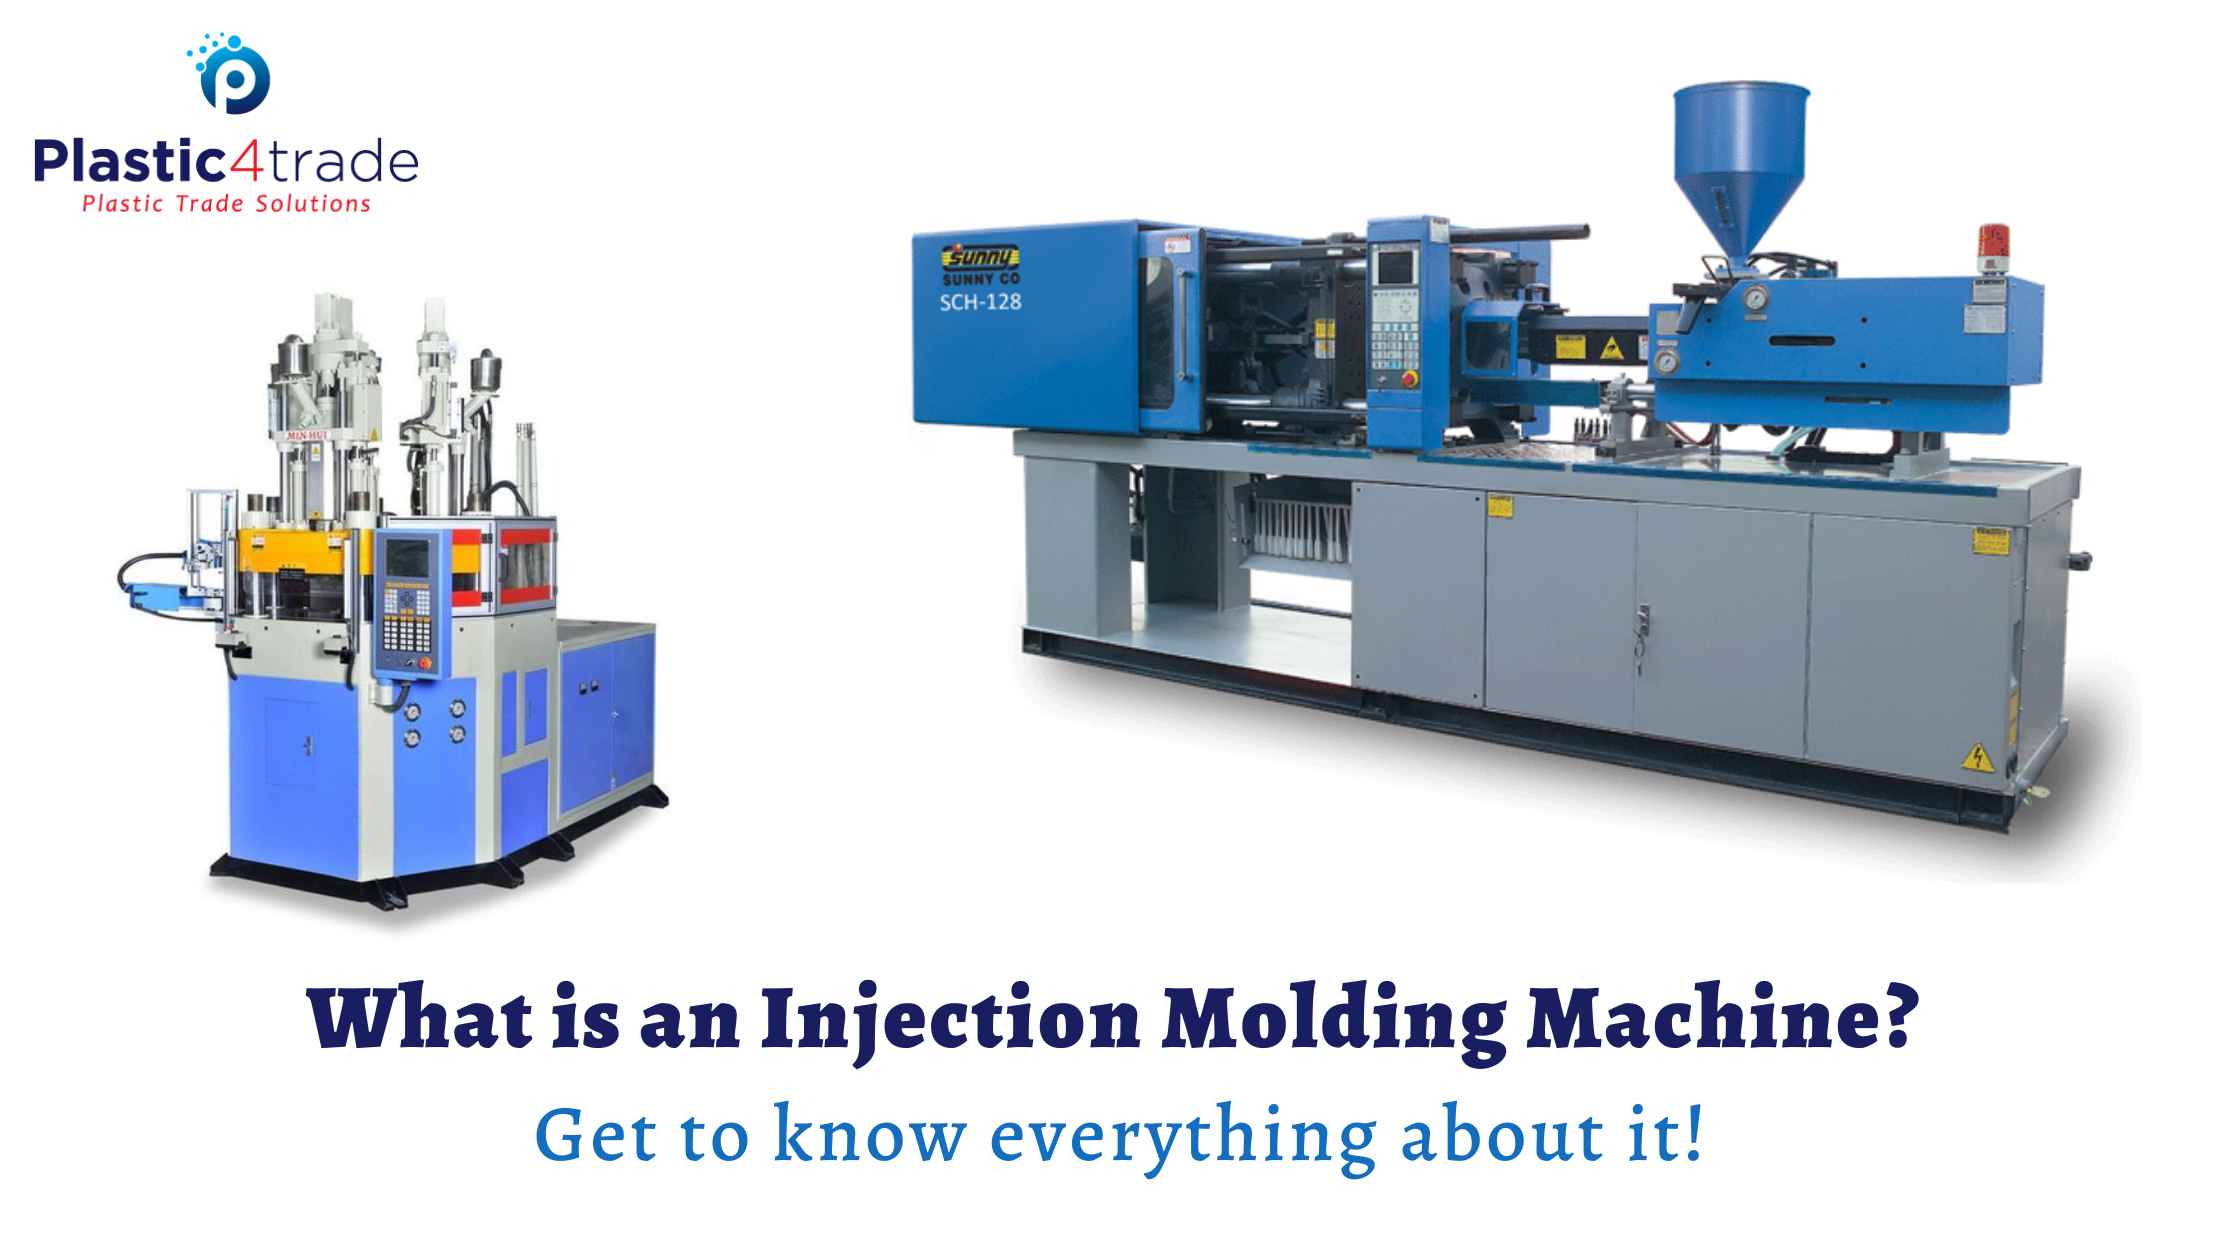 What is an Injection Molding Machine? Get to know everything about it! Plastic4trade